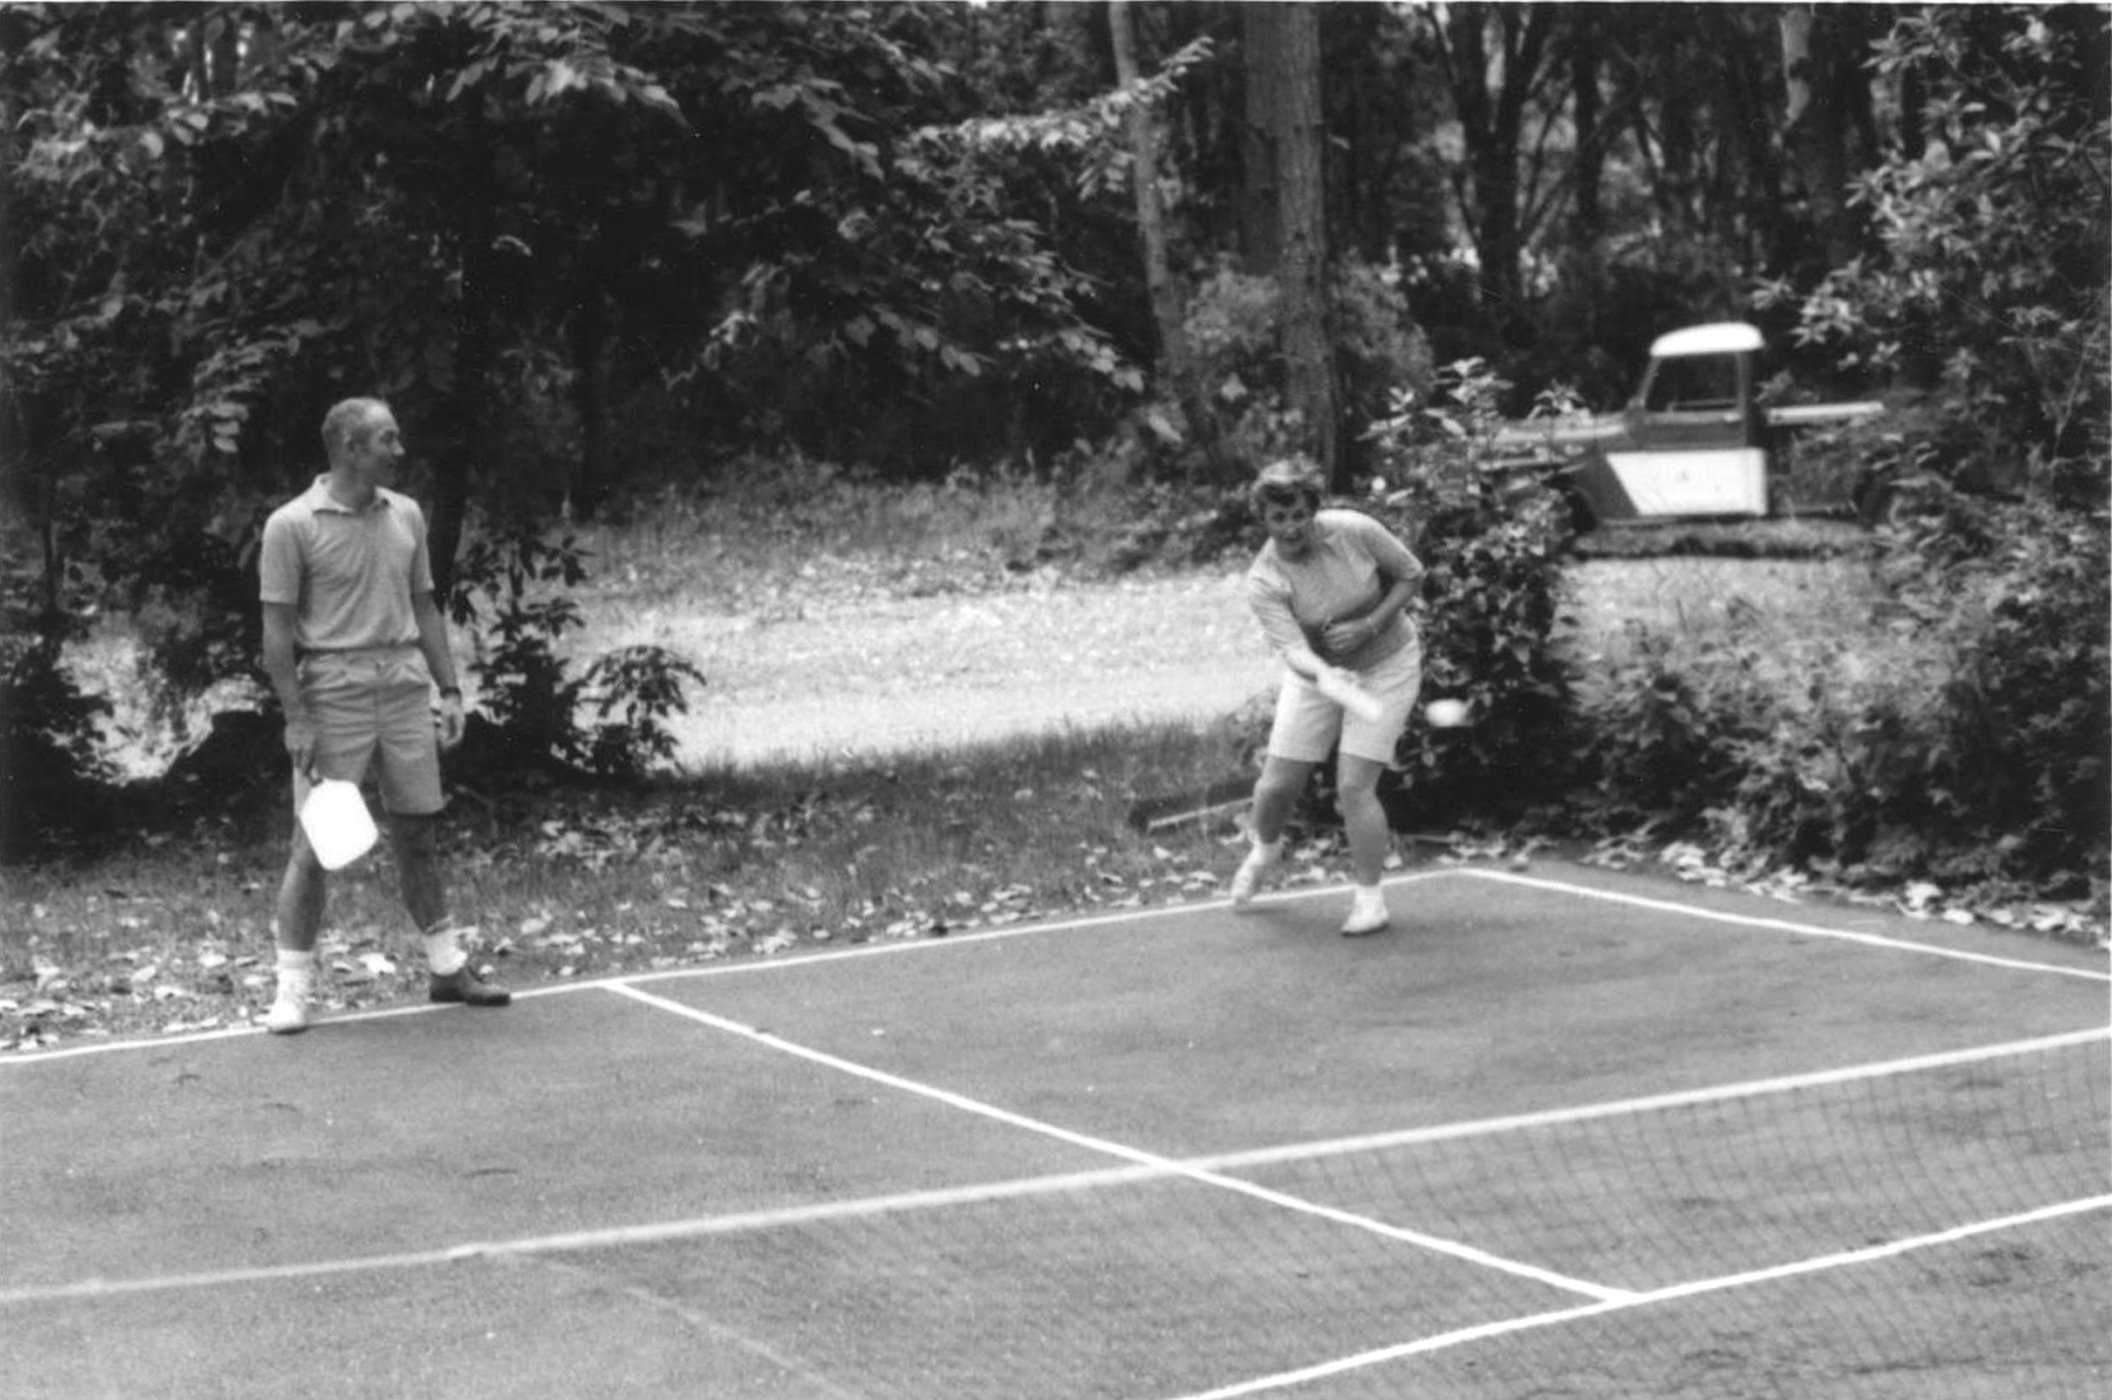 Pickleball founders Joe and Joan Pritchard play on the court where it all started in 1965. (Photo courtesy of USA Pickleball)